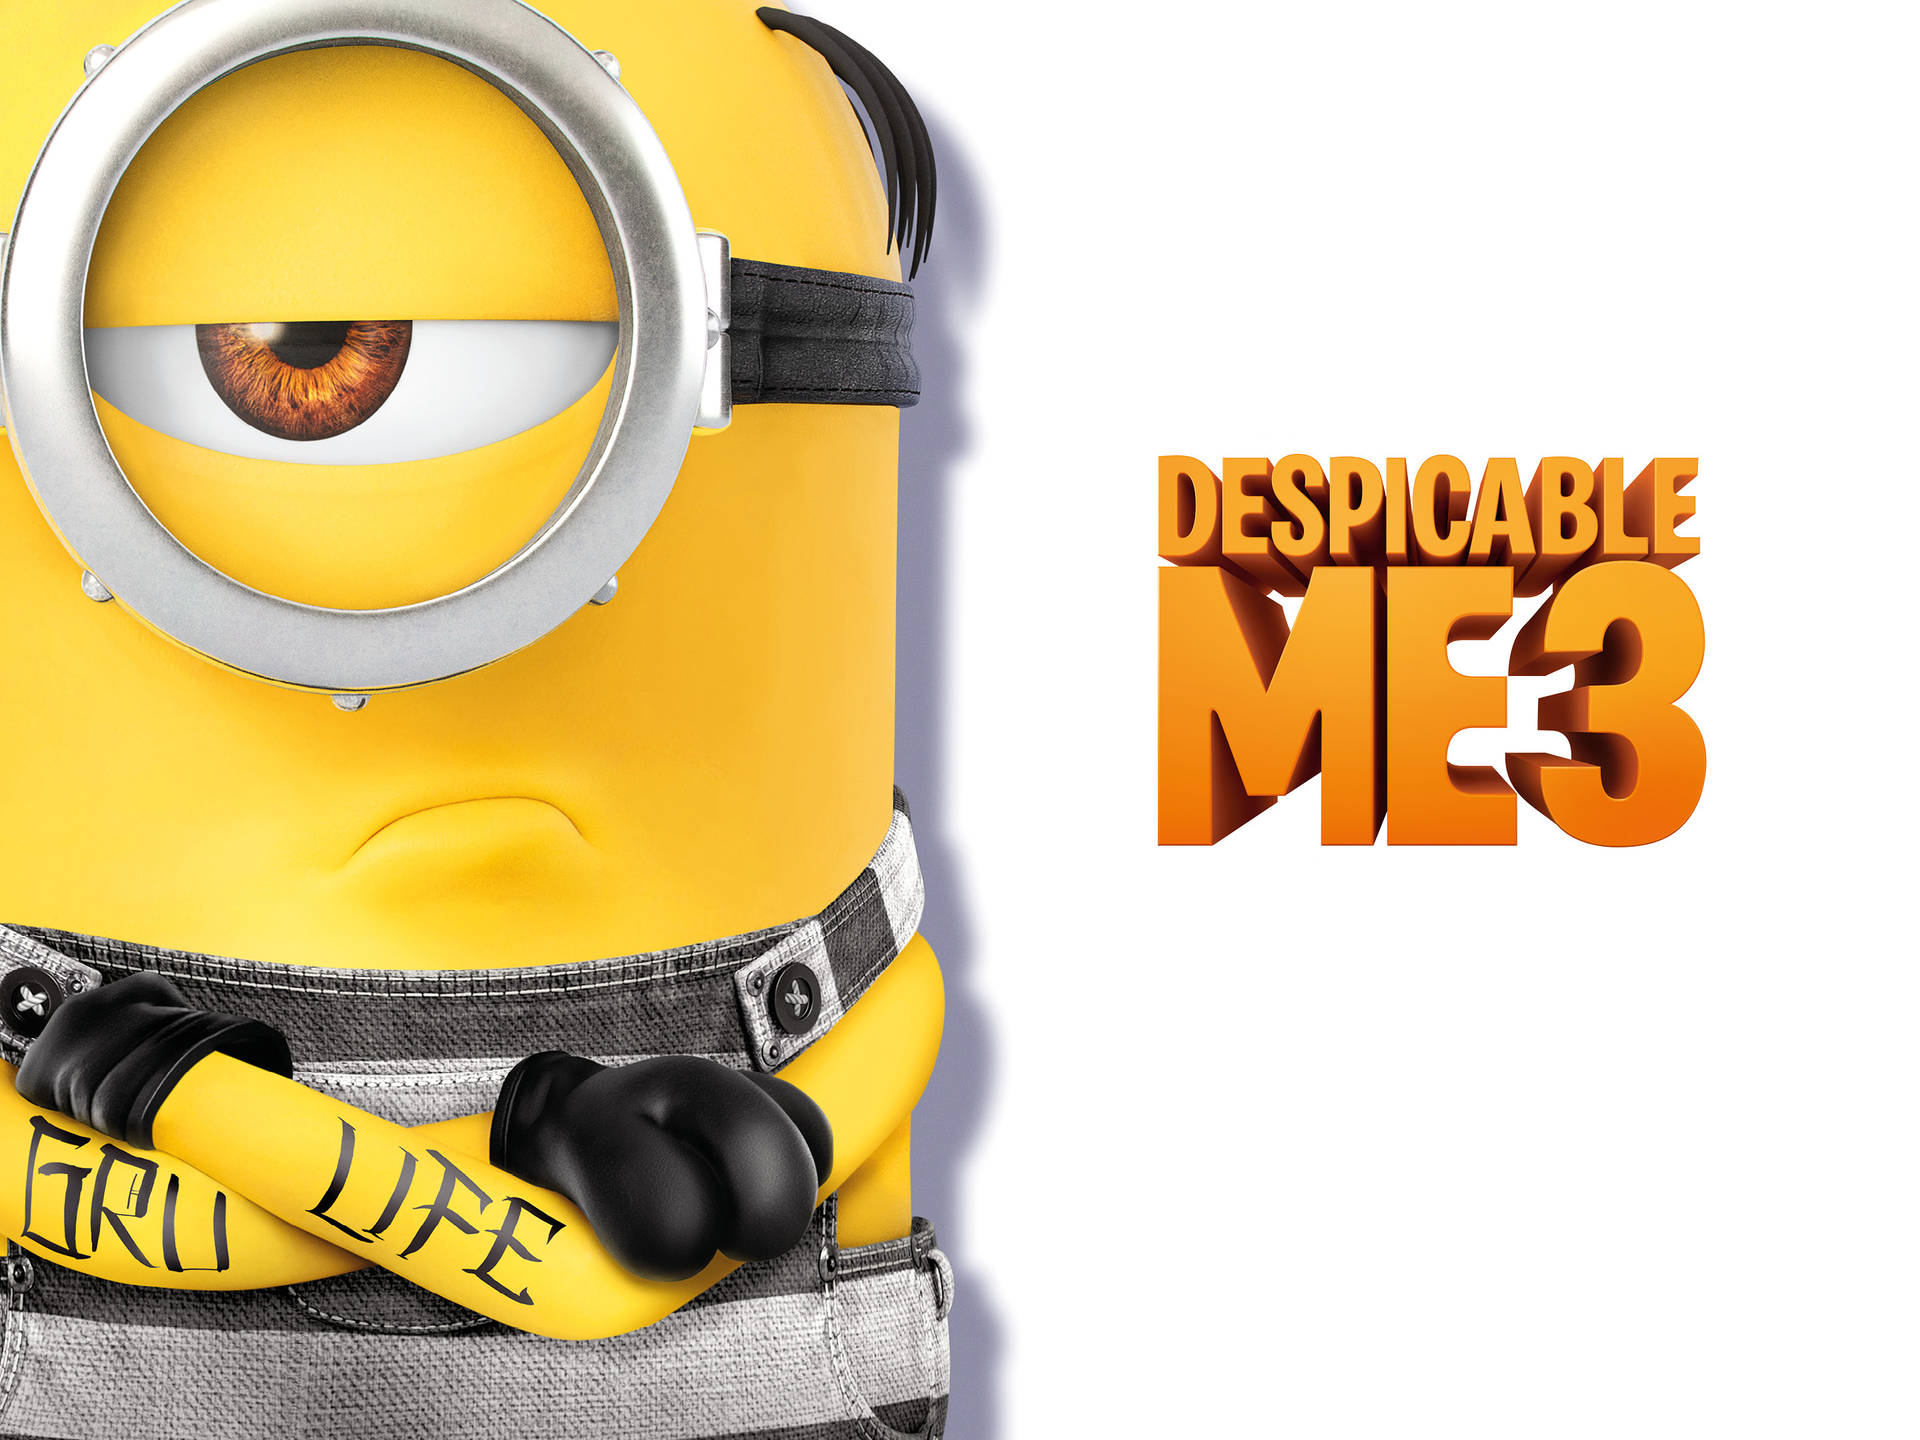 Marvelous Poster Of Despicable Me 3 Wallpaper